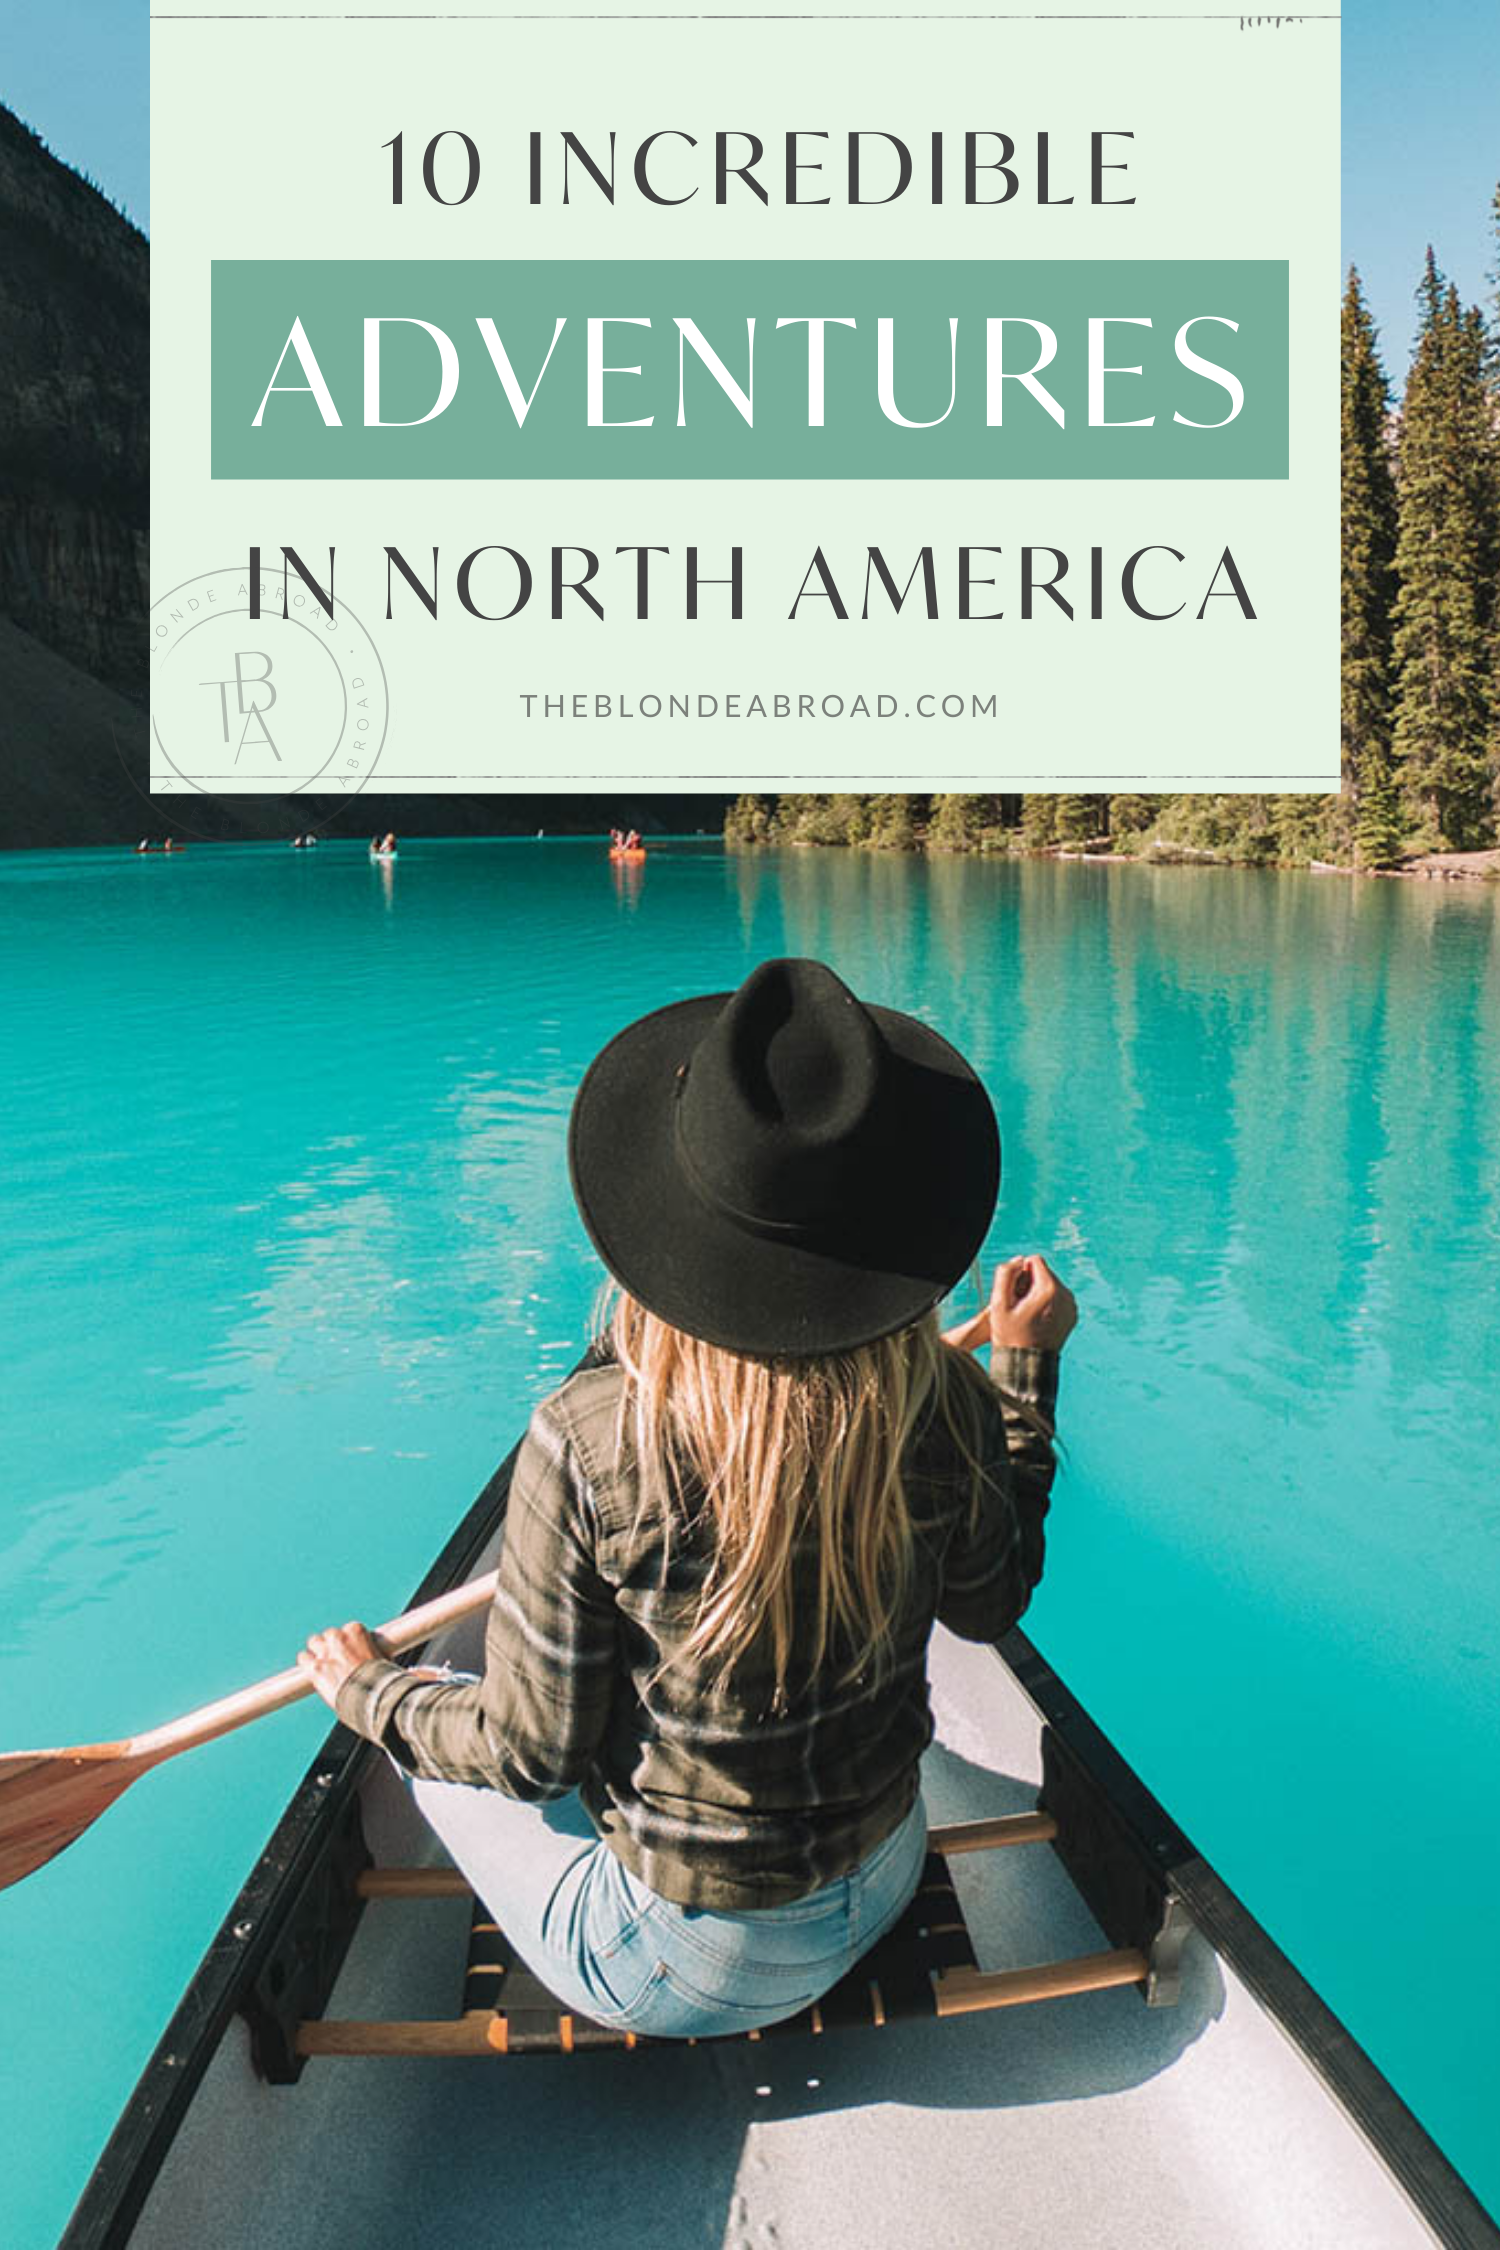 10 Incredible Adventures to Have in North America